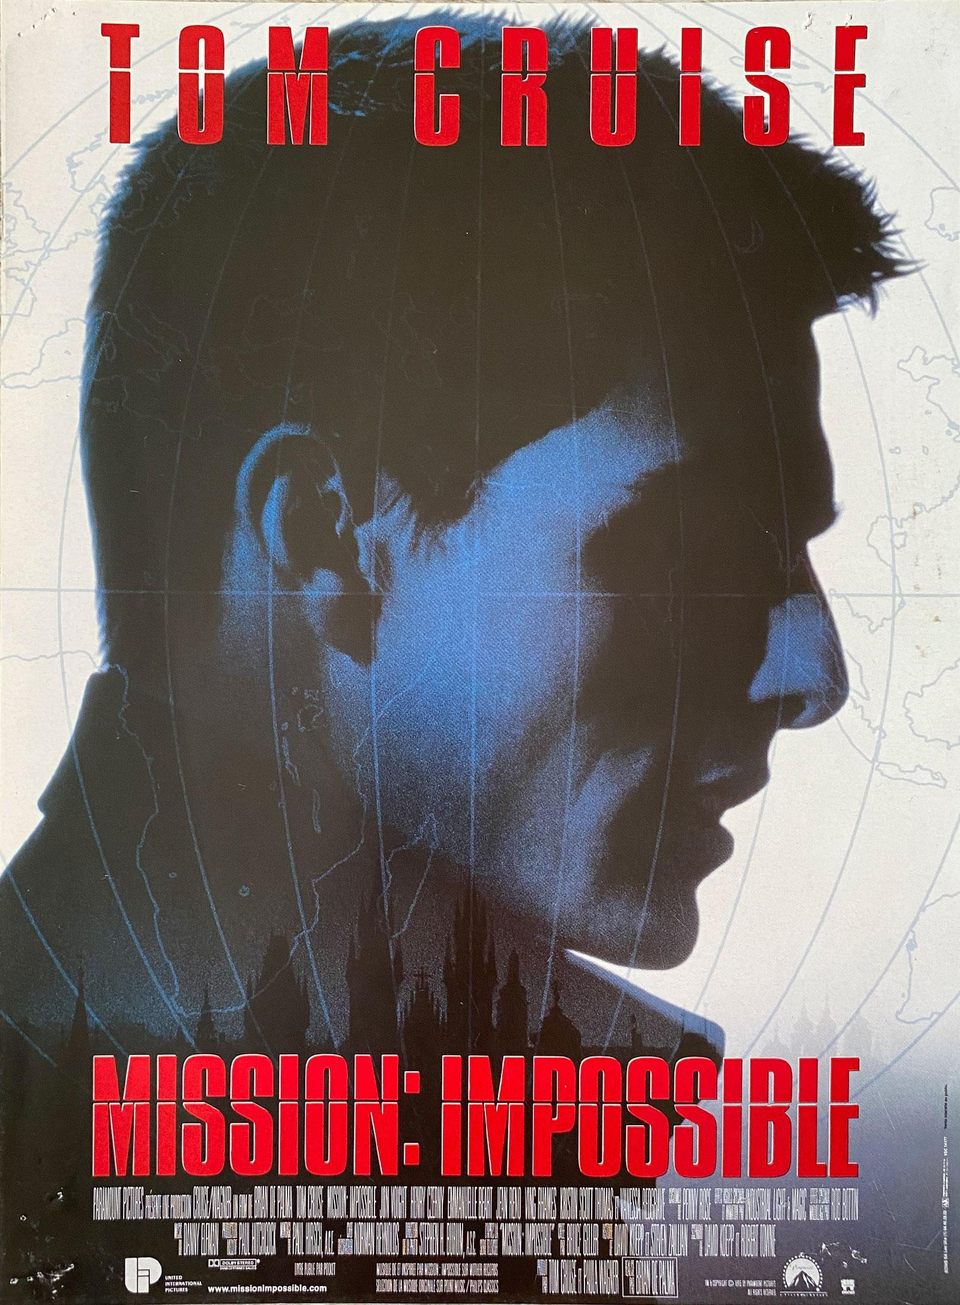 Film Mission: Impossible